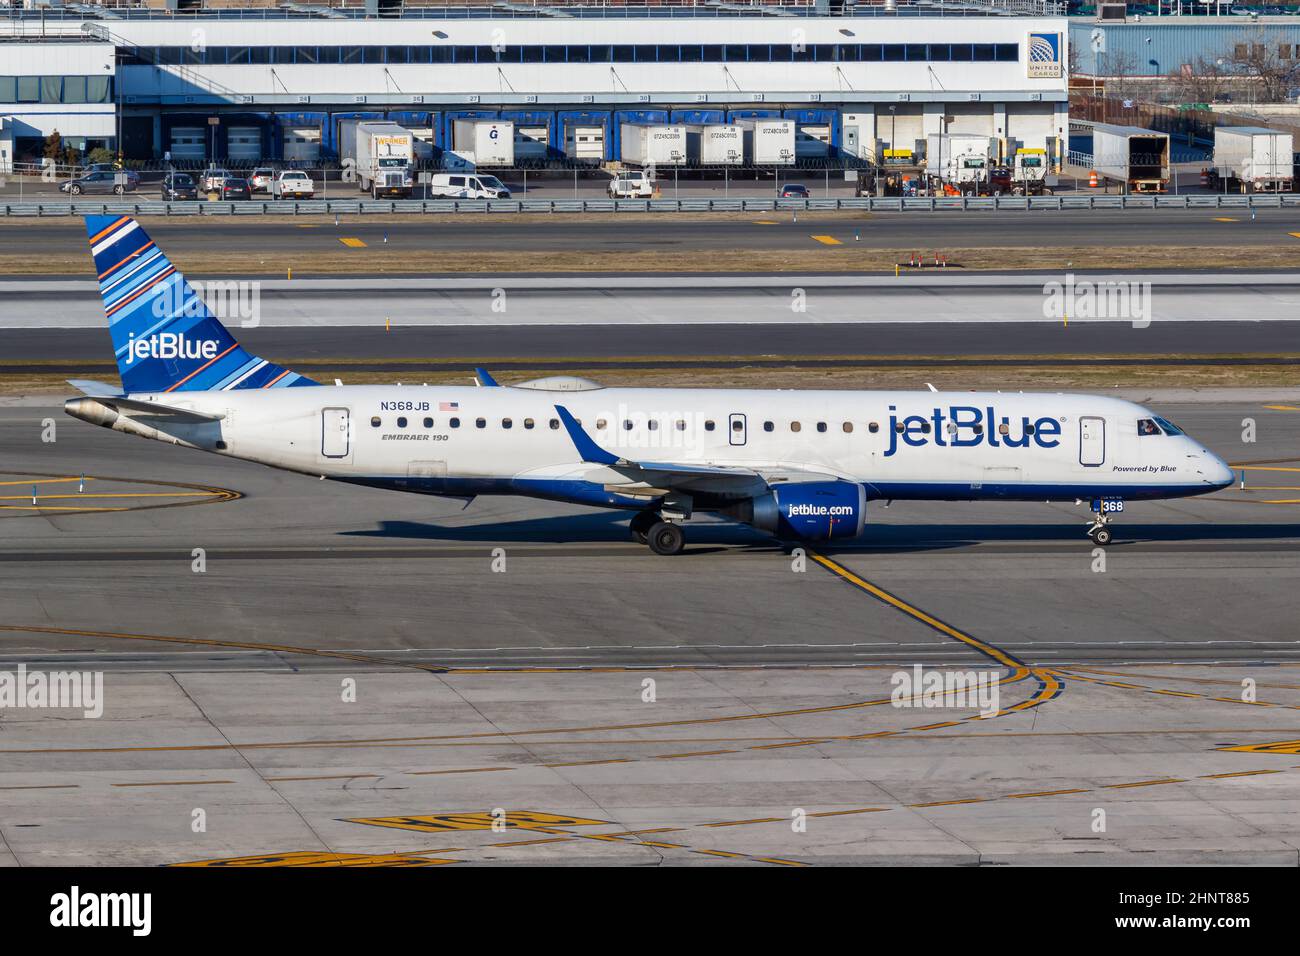 JetBlue Embraer 190 airplane New York JFK airport in the United States Stock Photo